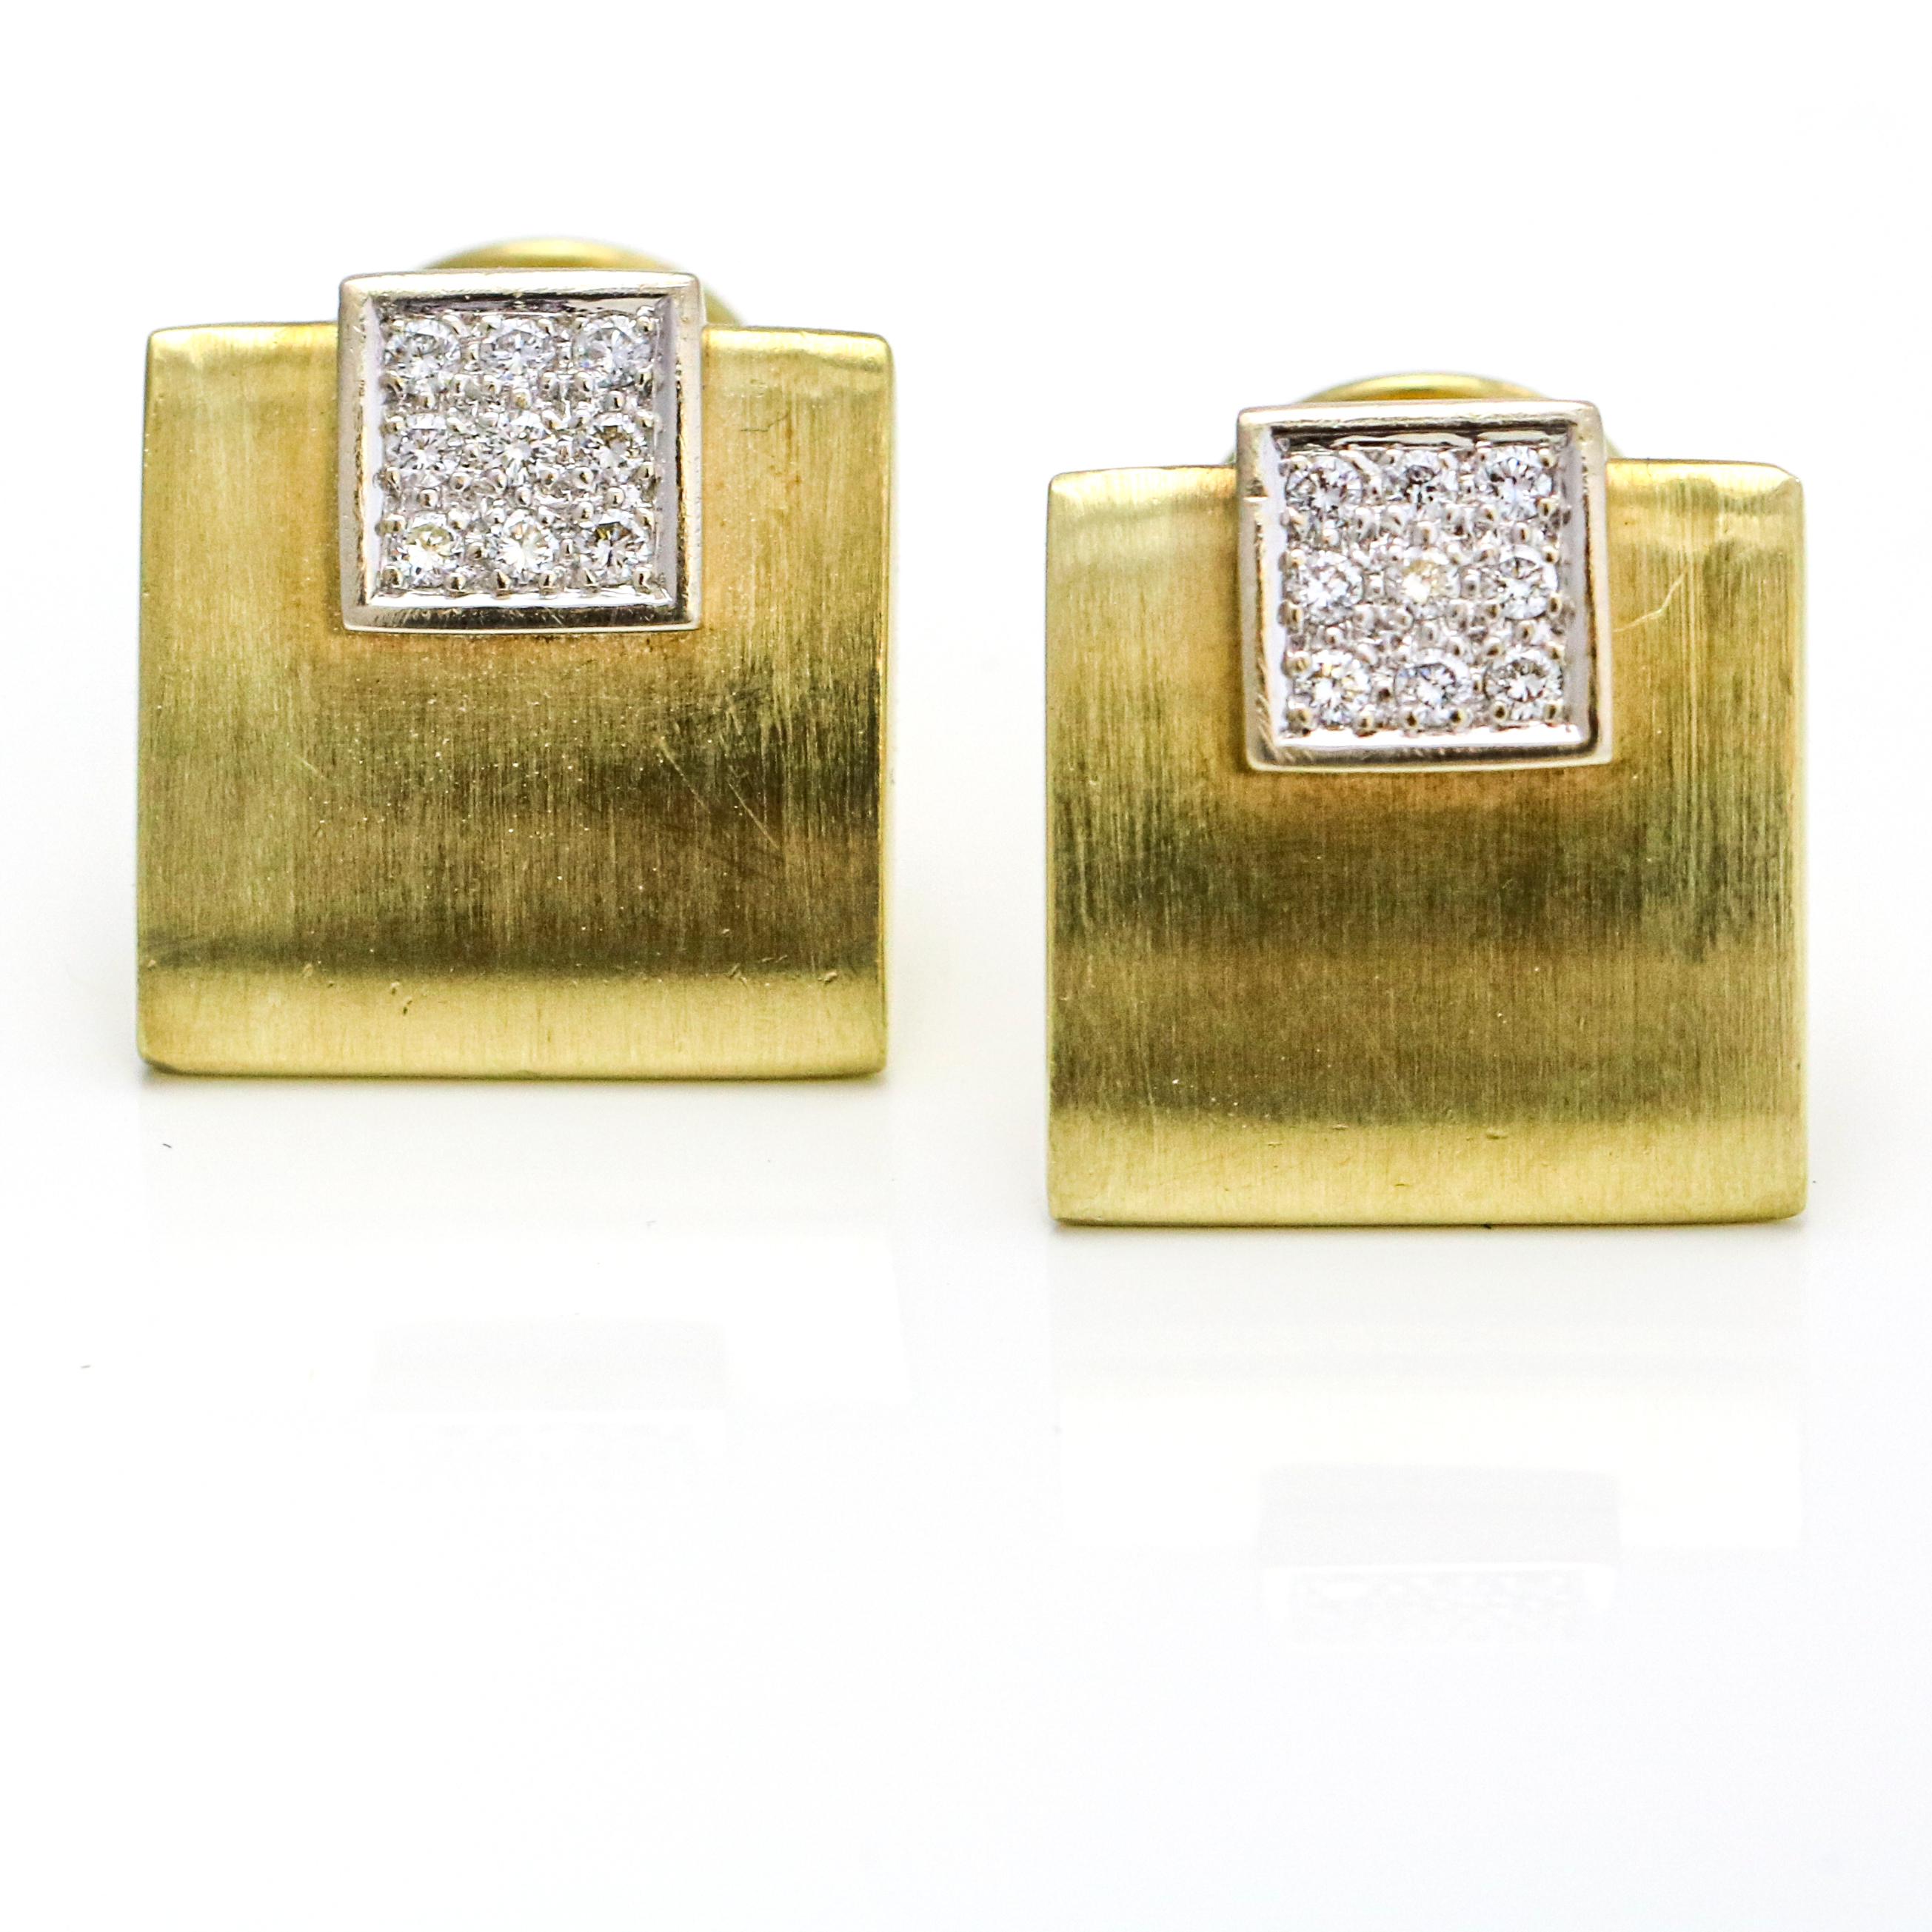 Square cufflinks in 14-karat yellow and white gold with diamonds. Brushed finish metal. Each cufflink has 9 pave set round-cut natural diamonds.

Diamond Total Carat Weight, .40 carat